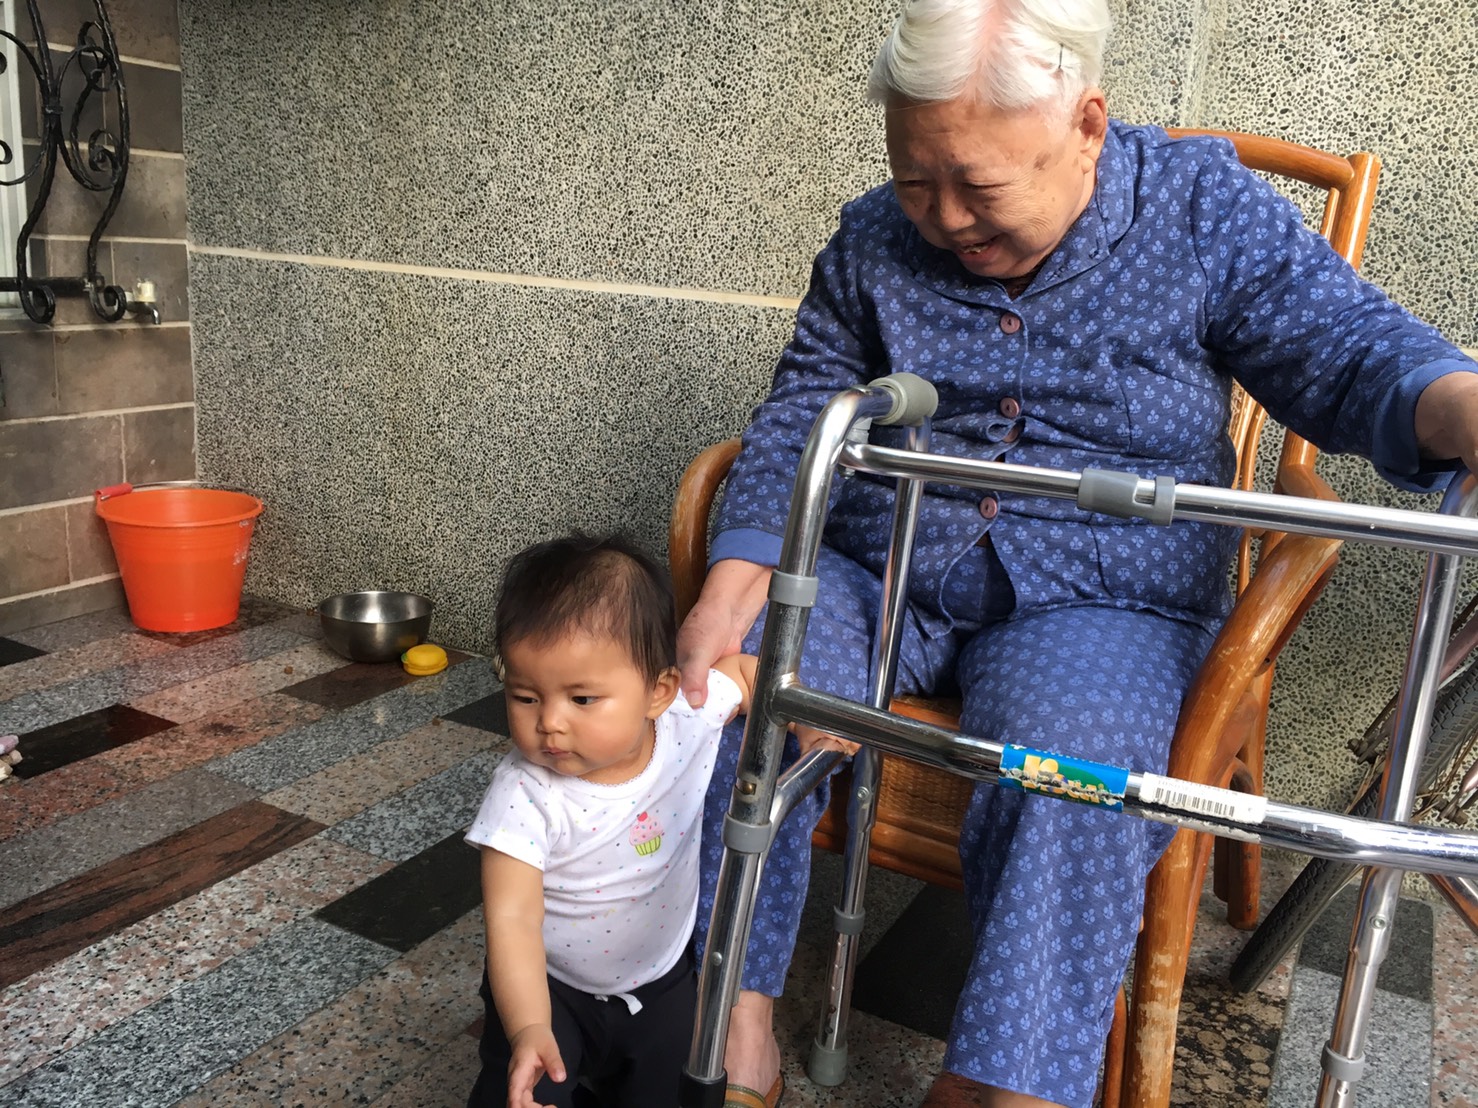 toddler next to her seated grandmother, wearing blue pajamas with a walker